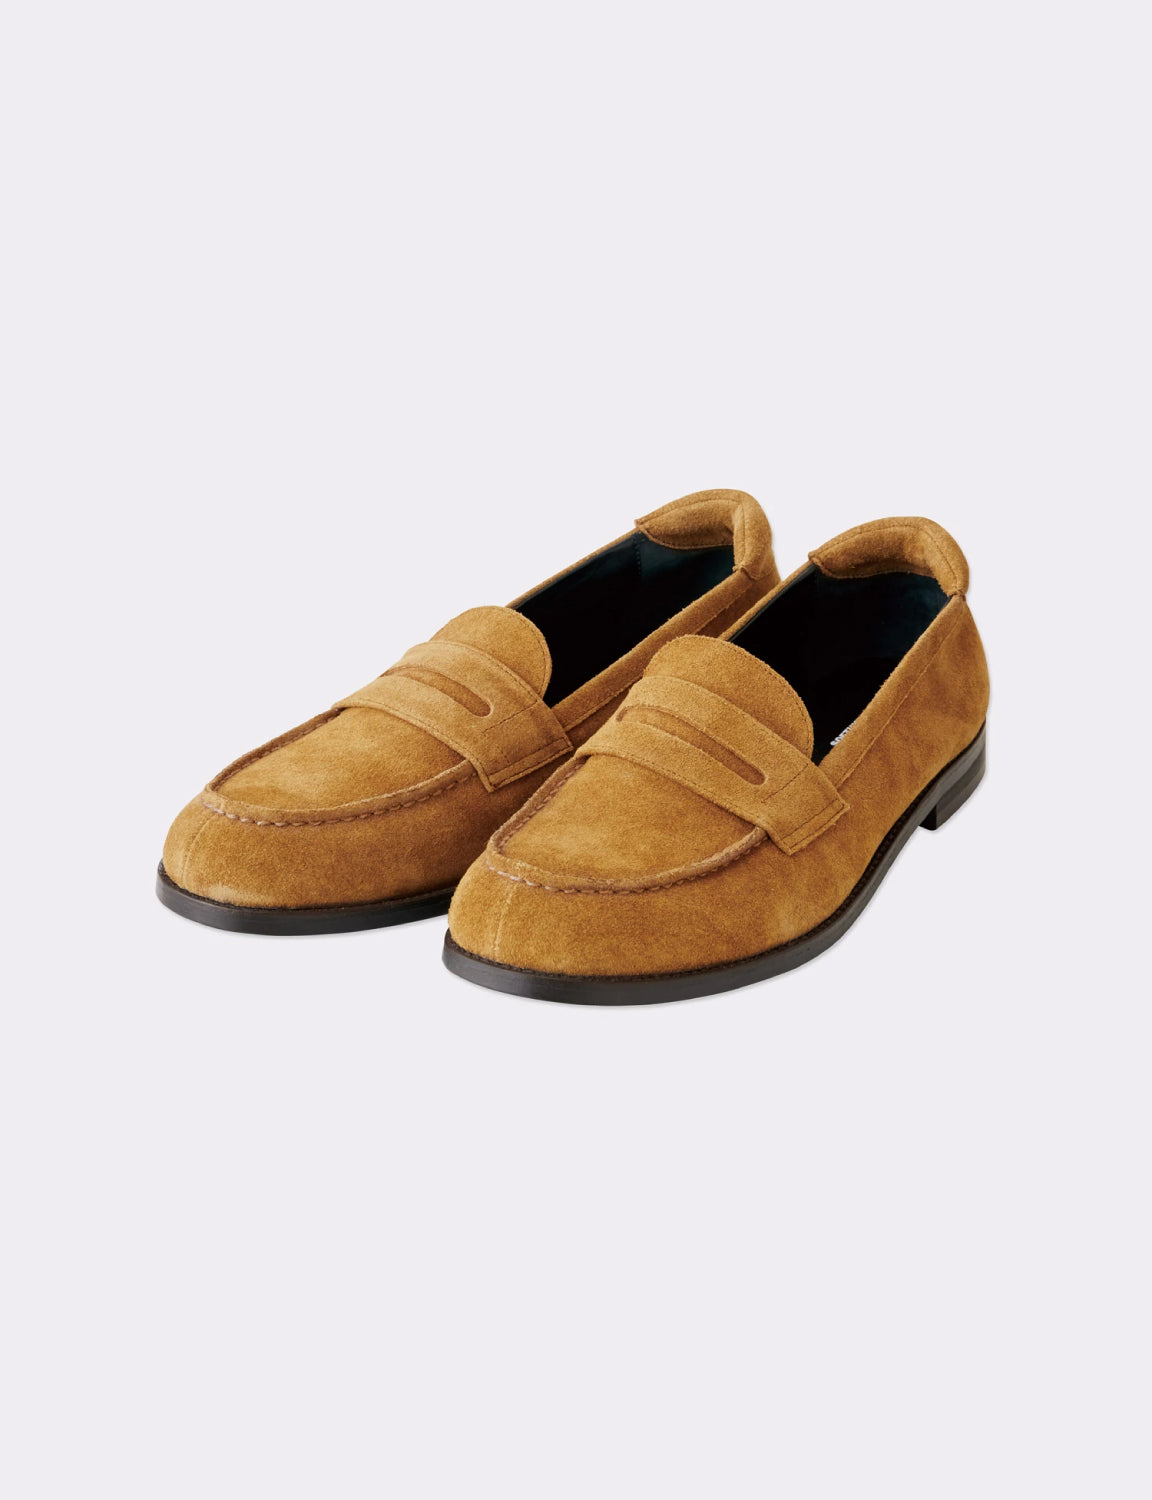 SOFTHYPHEN - SAKIAS Re LOAFERS – The Contemporary Fix Kyoto